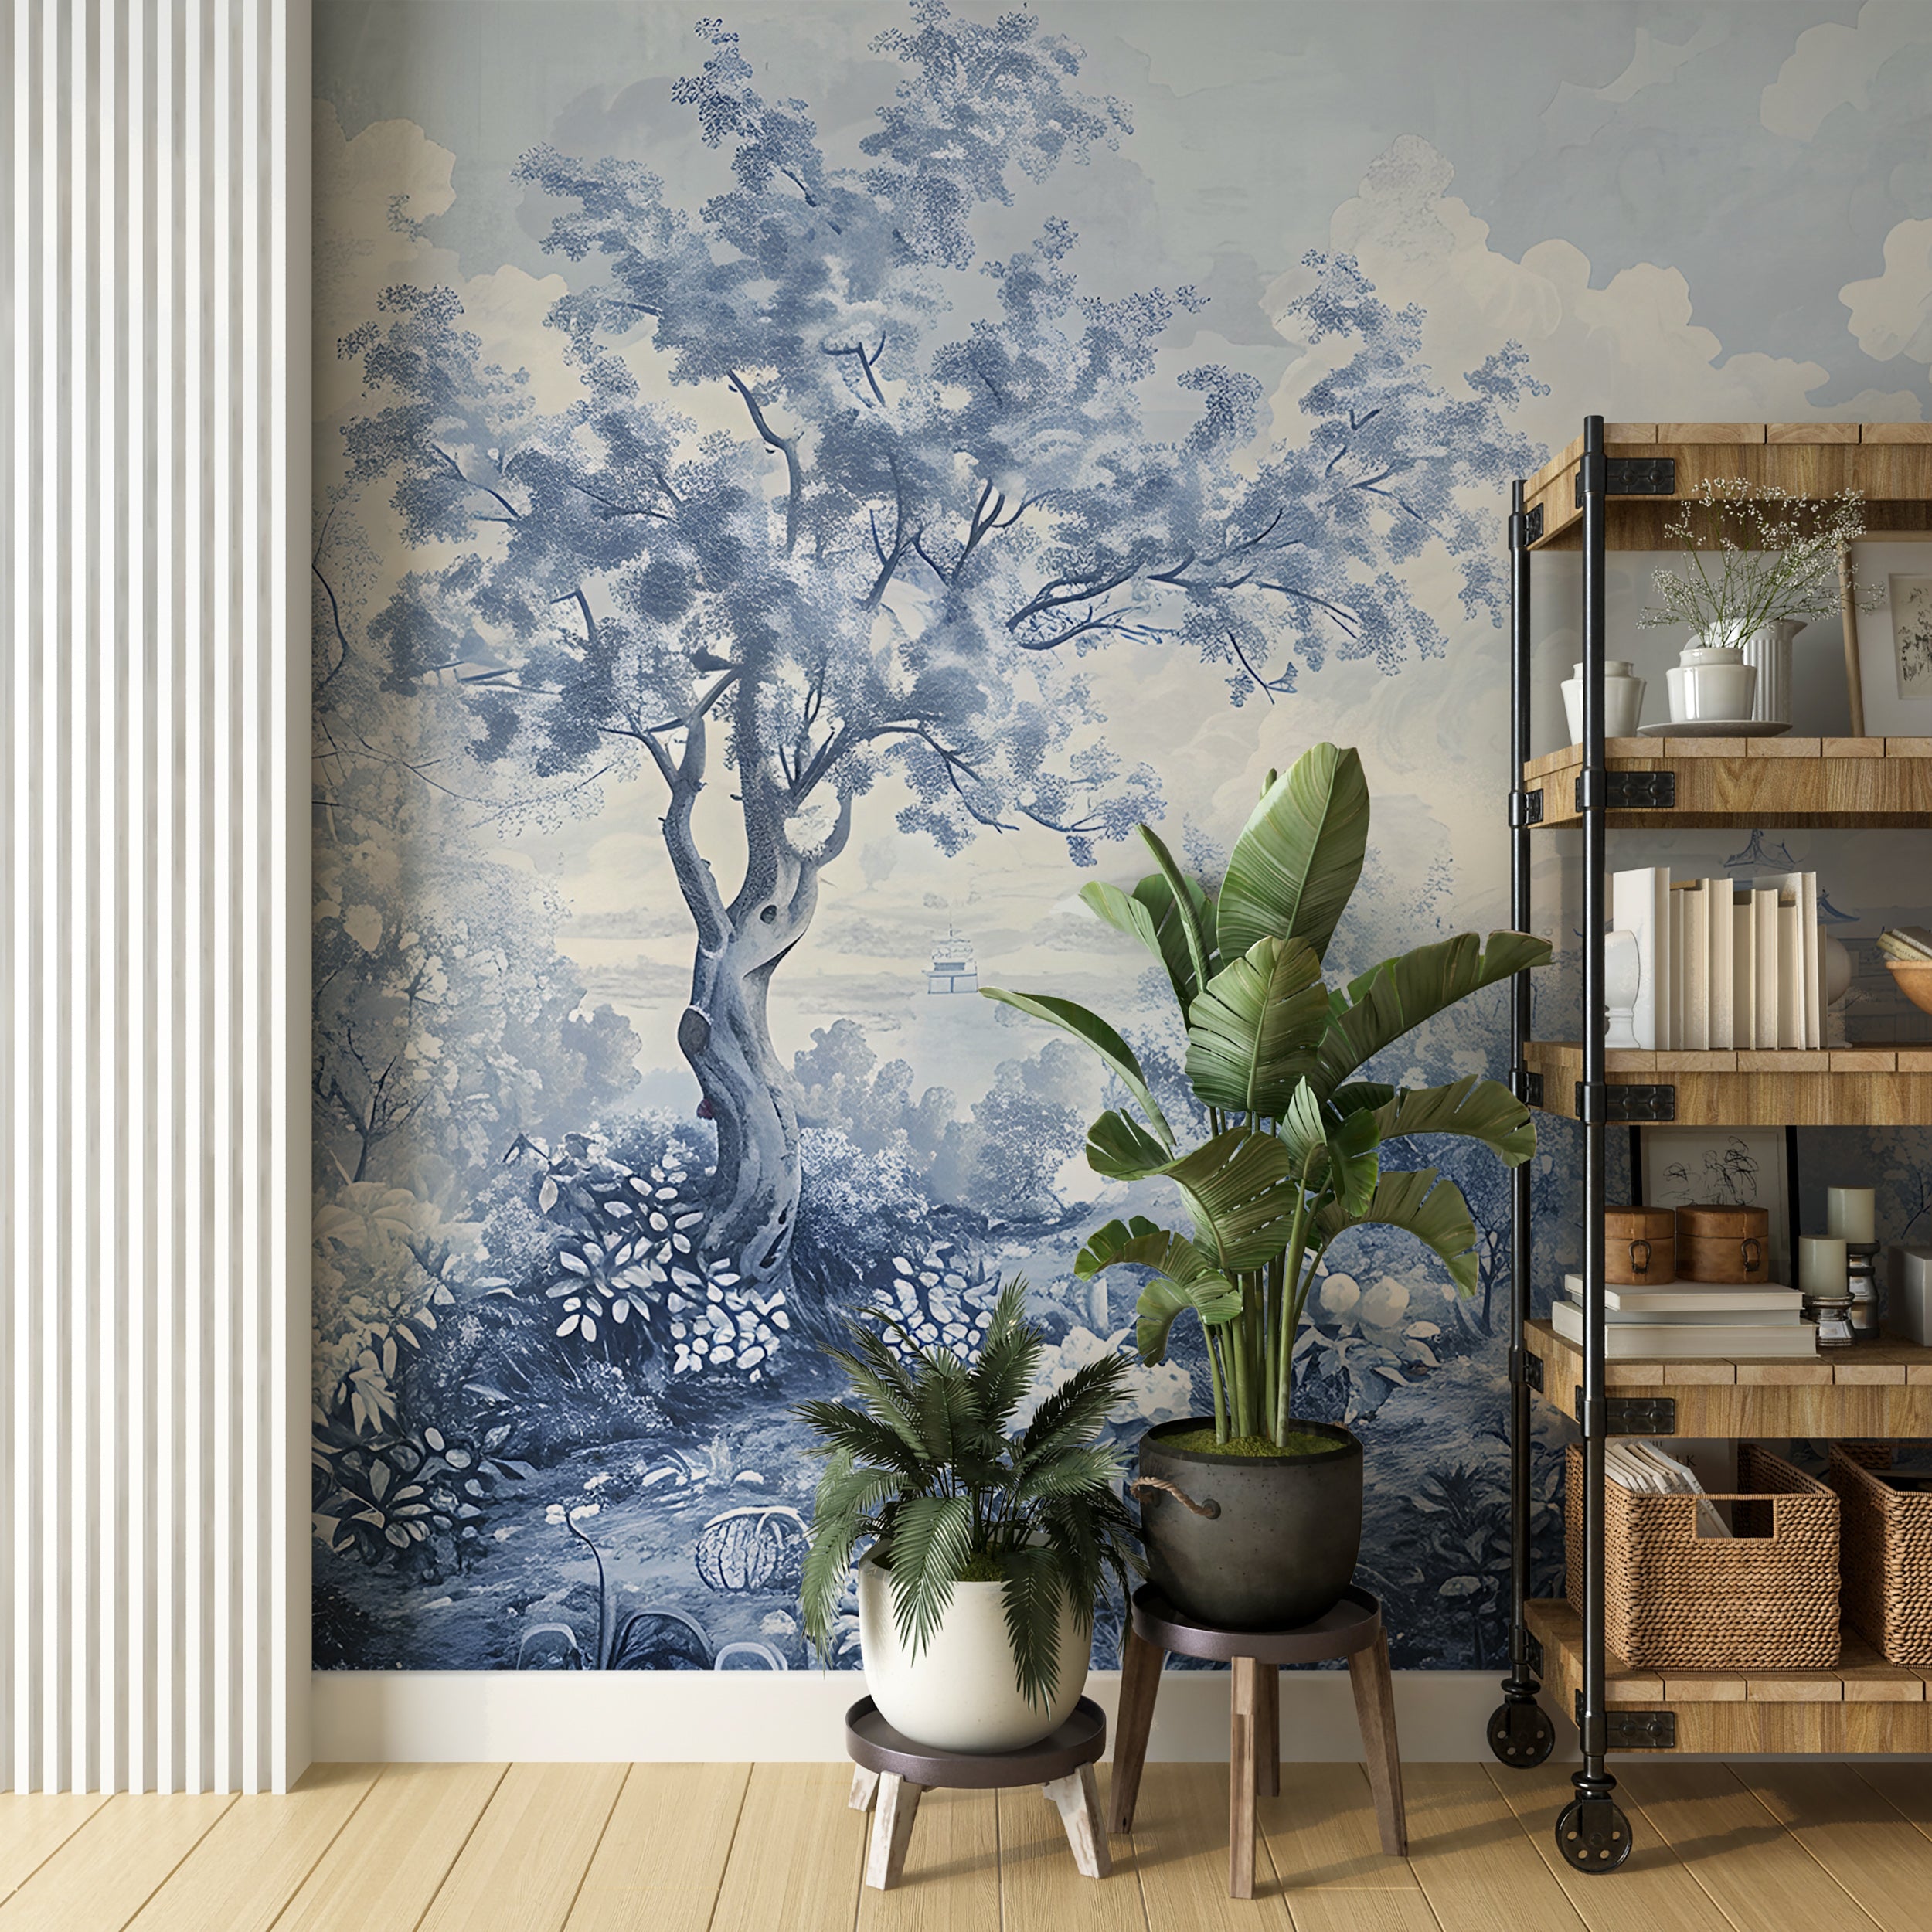 Removable French landscape wallpaper